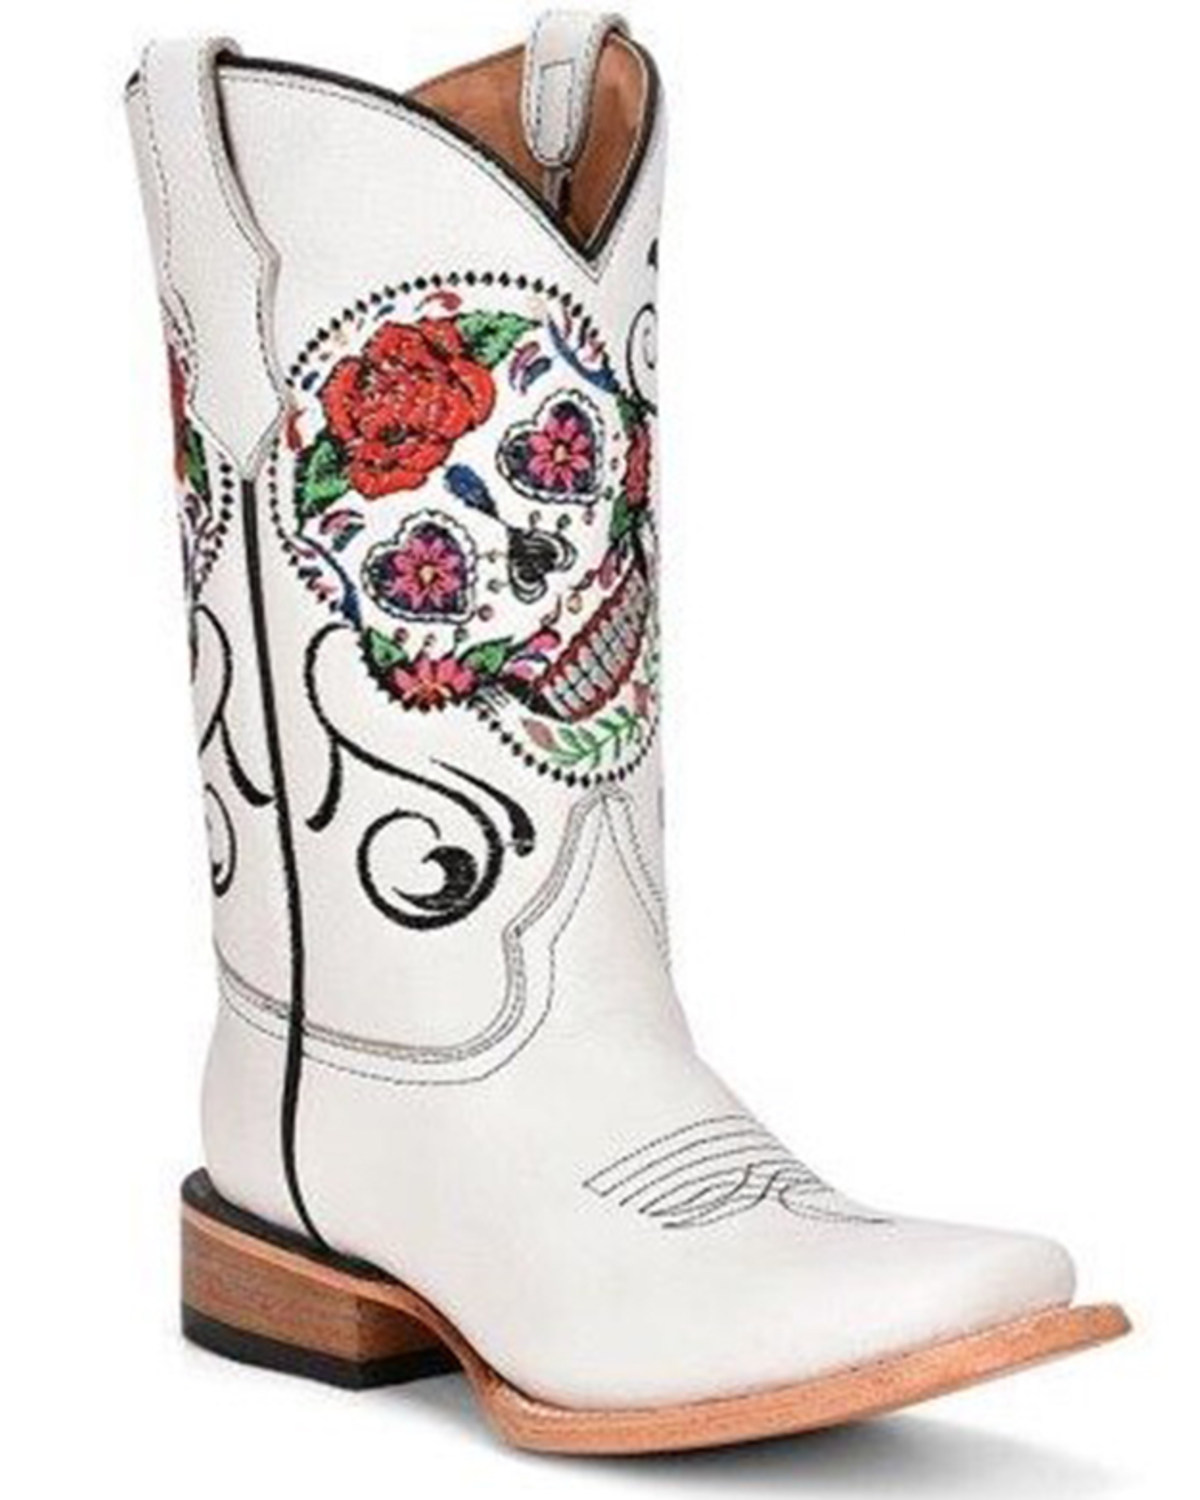 Corral Girls' Floral & Skull Embroidered Western Boots - Square Toe